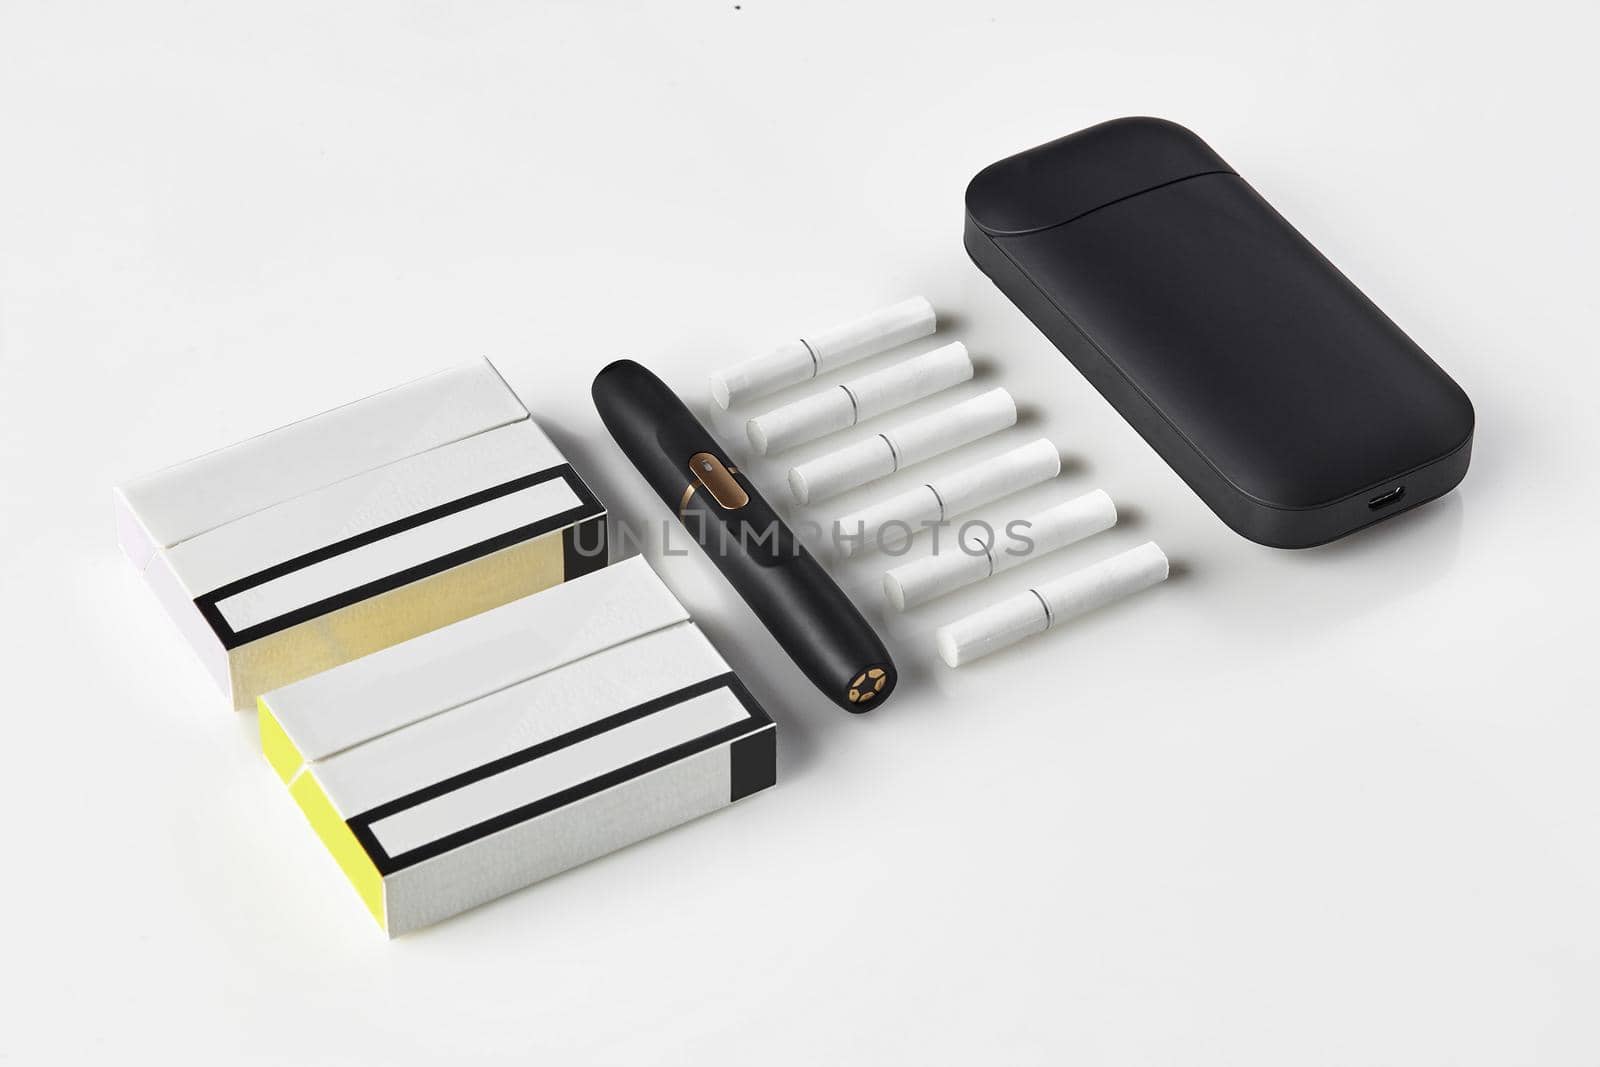 New generation black electronic cigarette and battery, two packs and six heatsticks isolated on white. New alternative technology. Heating tobacco system. Advertising area, workspace mock up. Close up